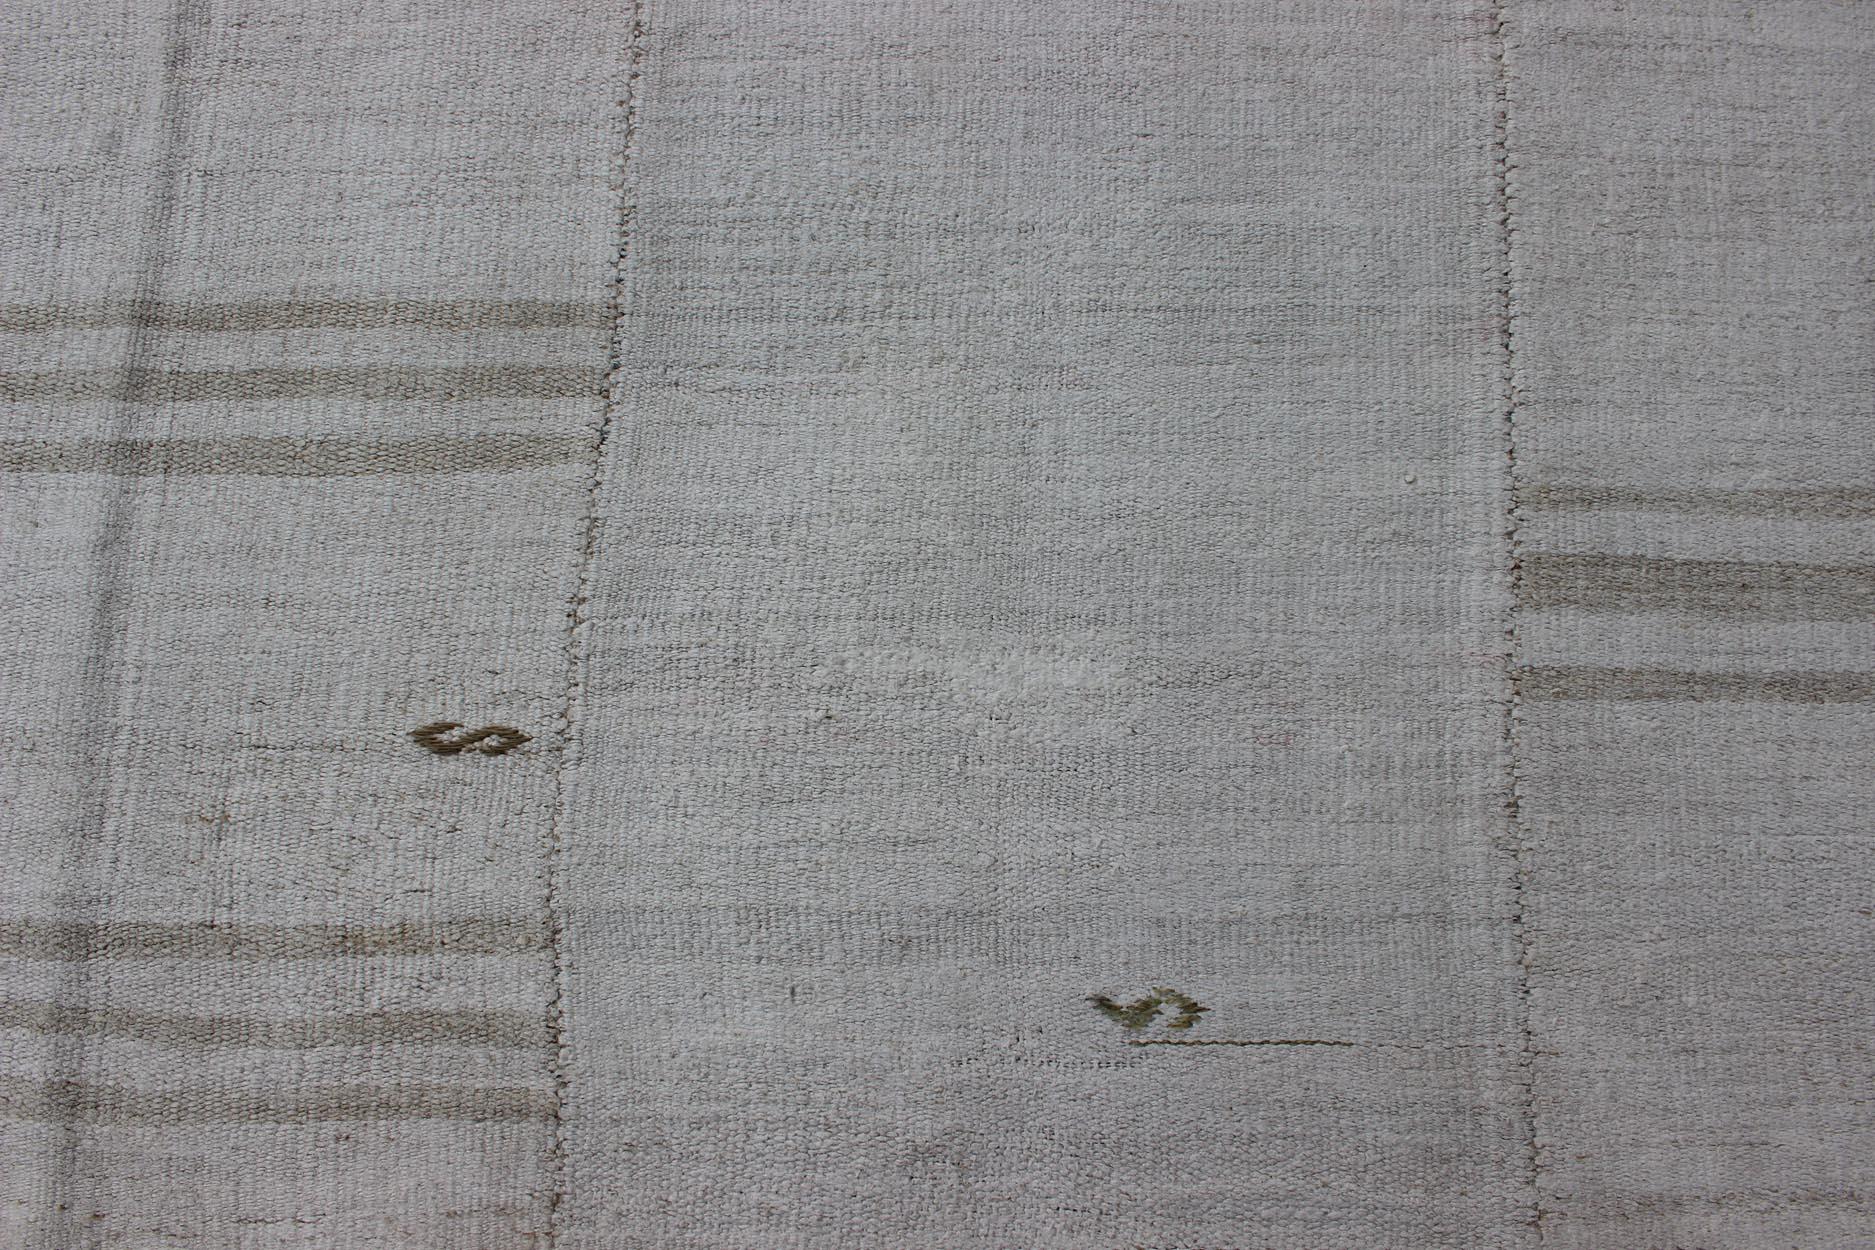 Cotton Square Vintage Paneled Flat-Weave with Modern Design in White and Neutral Tones For Sale